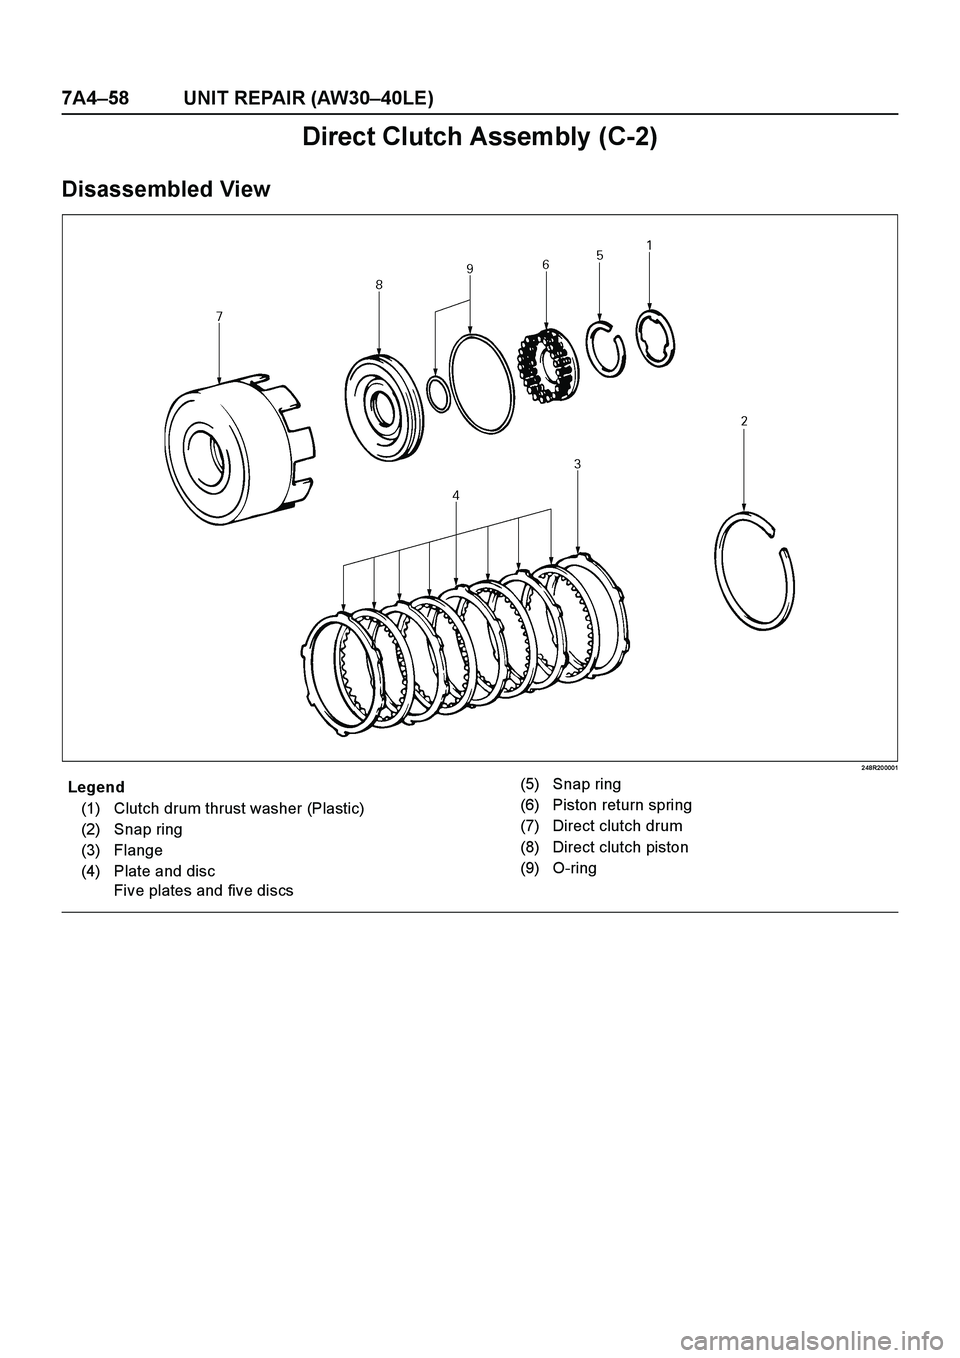 ISUZU TF SERIES 2004  Workshop Manual 7A4–58 UNIT REPAIR (AW30–40LE)
Direct Clutch Assembly (C-2)
Disassembled View
2 48R20 0001
E nd O FCallo ut
Legend
(1) Clutch drum thrust washer (Plastic)
(2) Snap ring
(3) Flange
(4) Plate and di